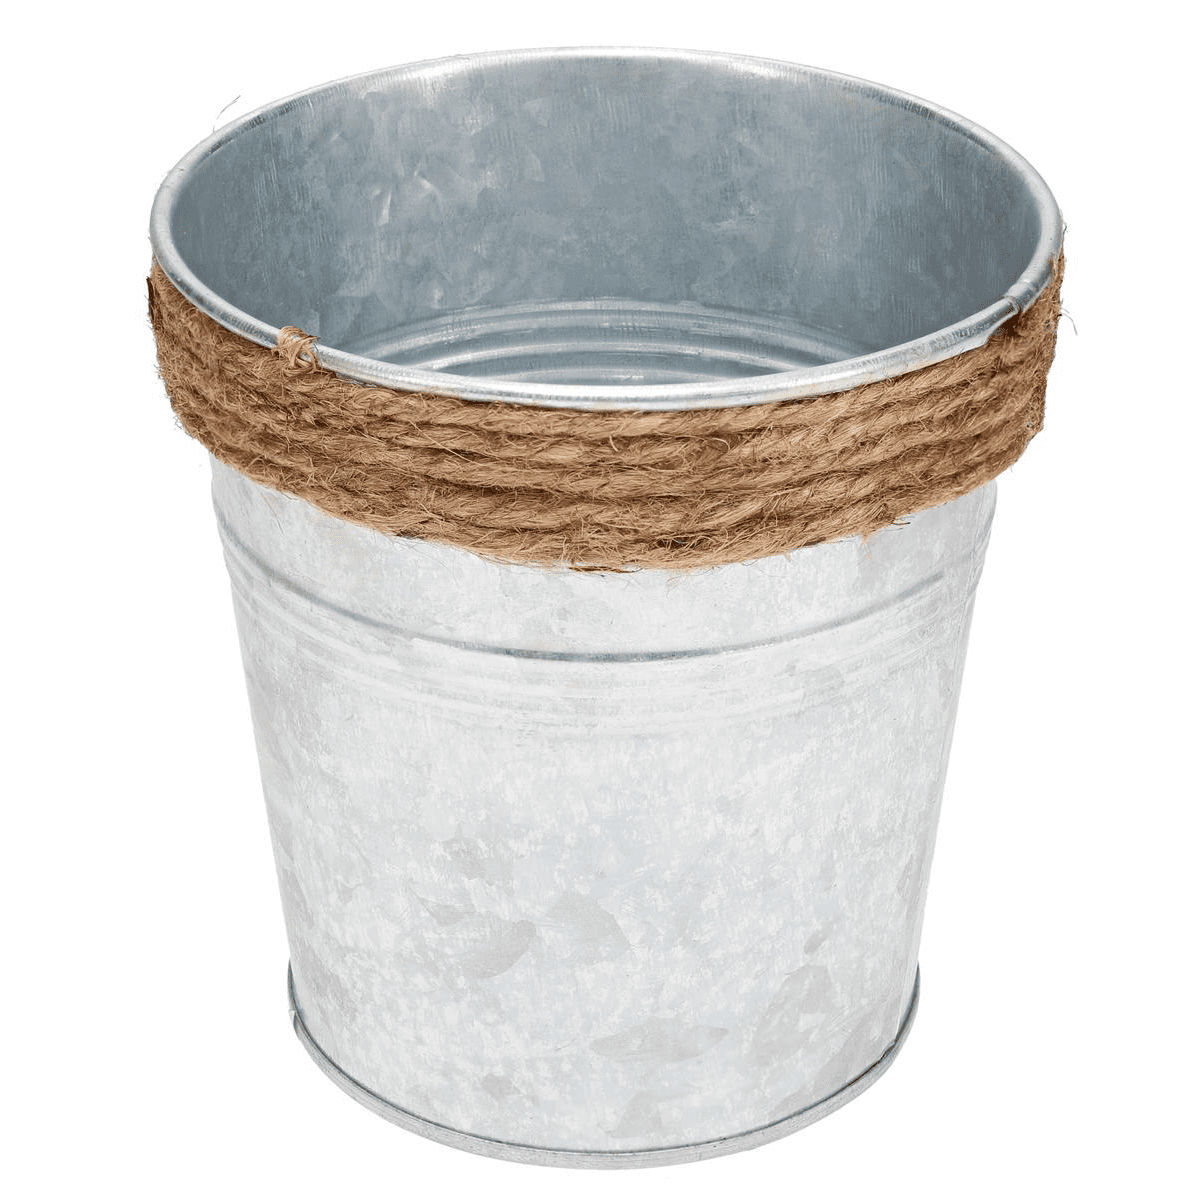 3 Pack Galvanized Metal Ice Buckets for Parties, 7 Inch Tin Pails with  Handles for Beer, Wine, Champagne, Home Decor, Table Centerpieces, Wedding  Decorations, (100 Oz)